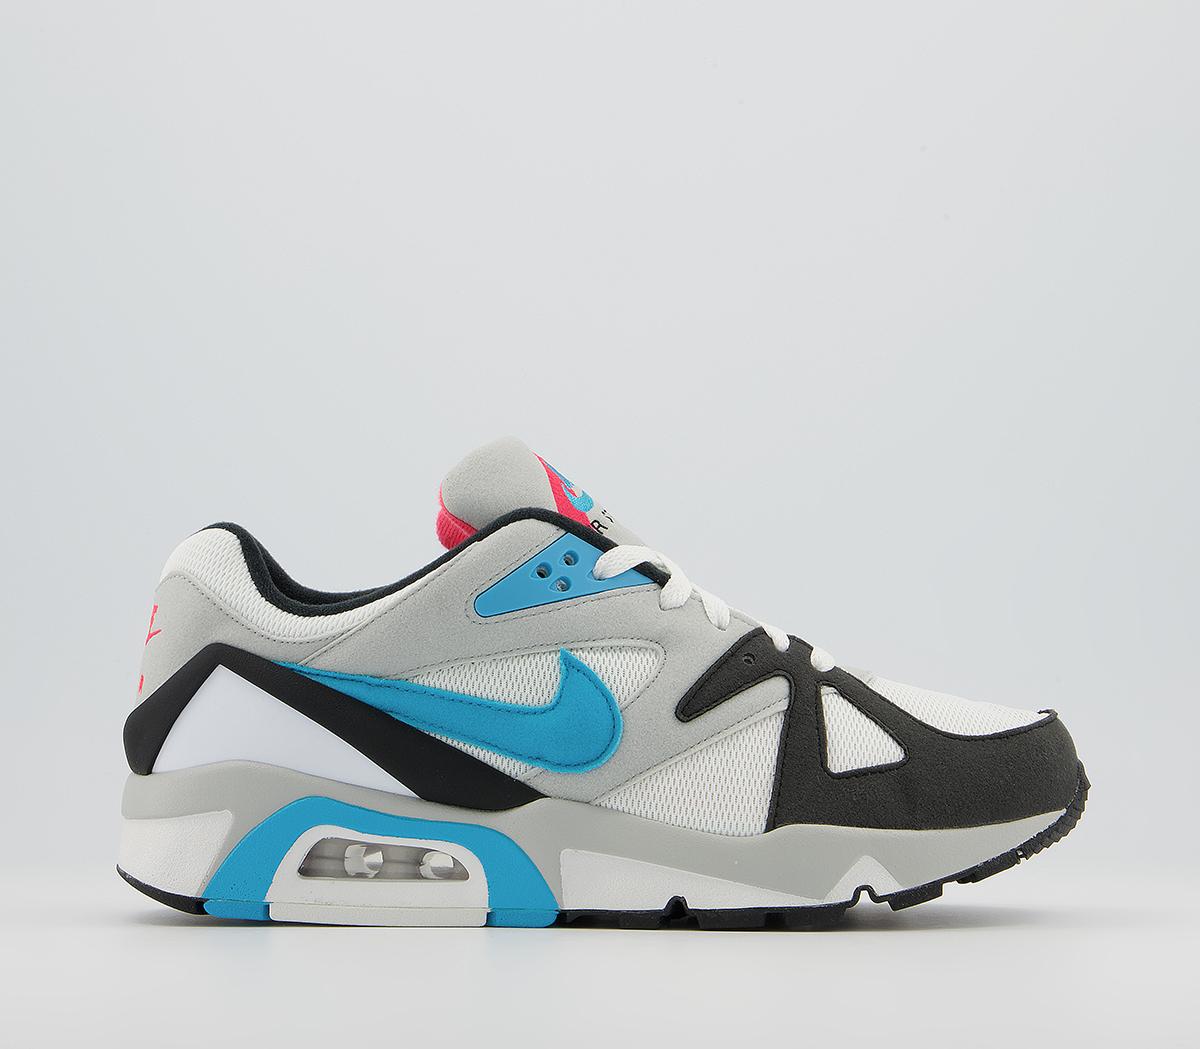 NikeAir Structure Og TrainersSummit White Neo Teal Black Infrared